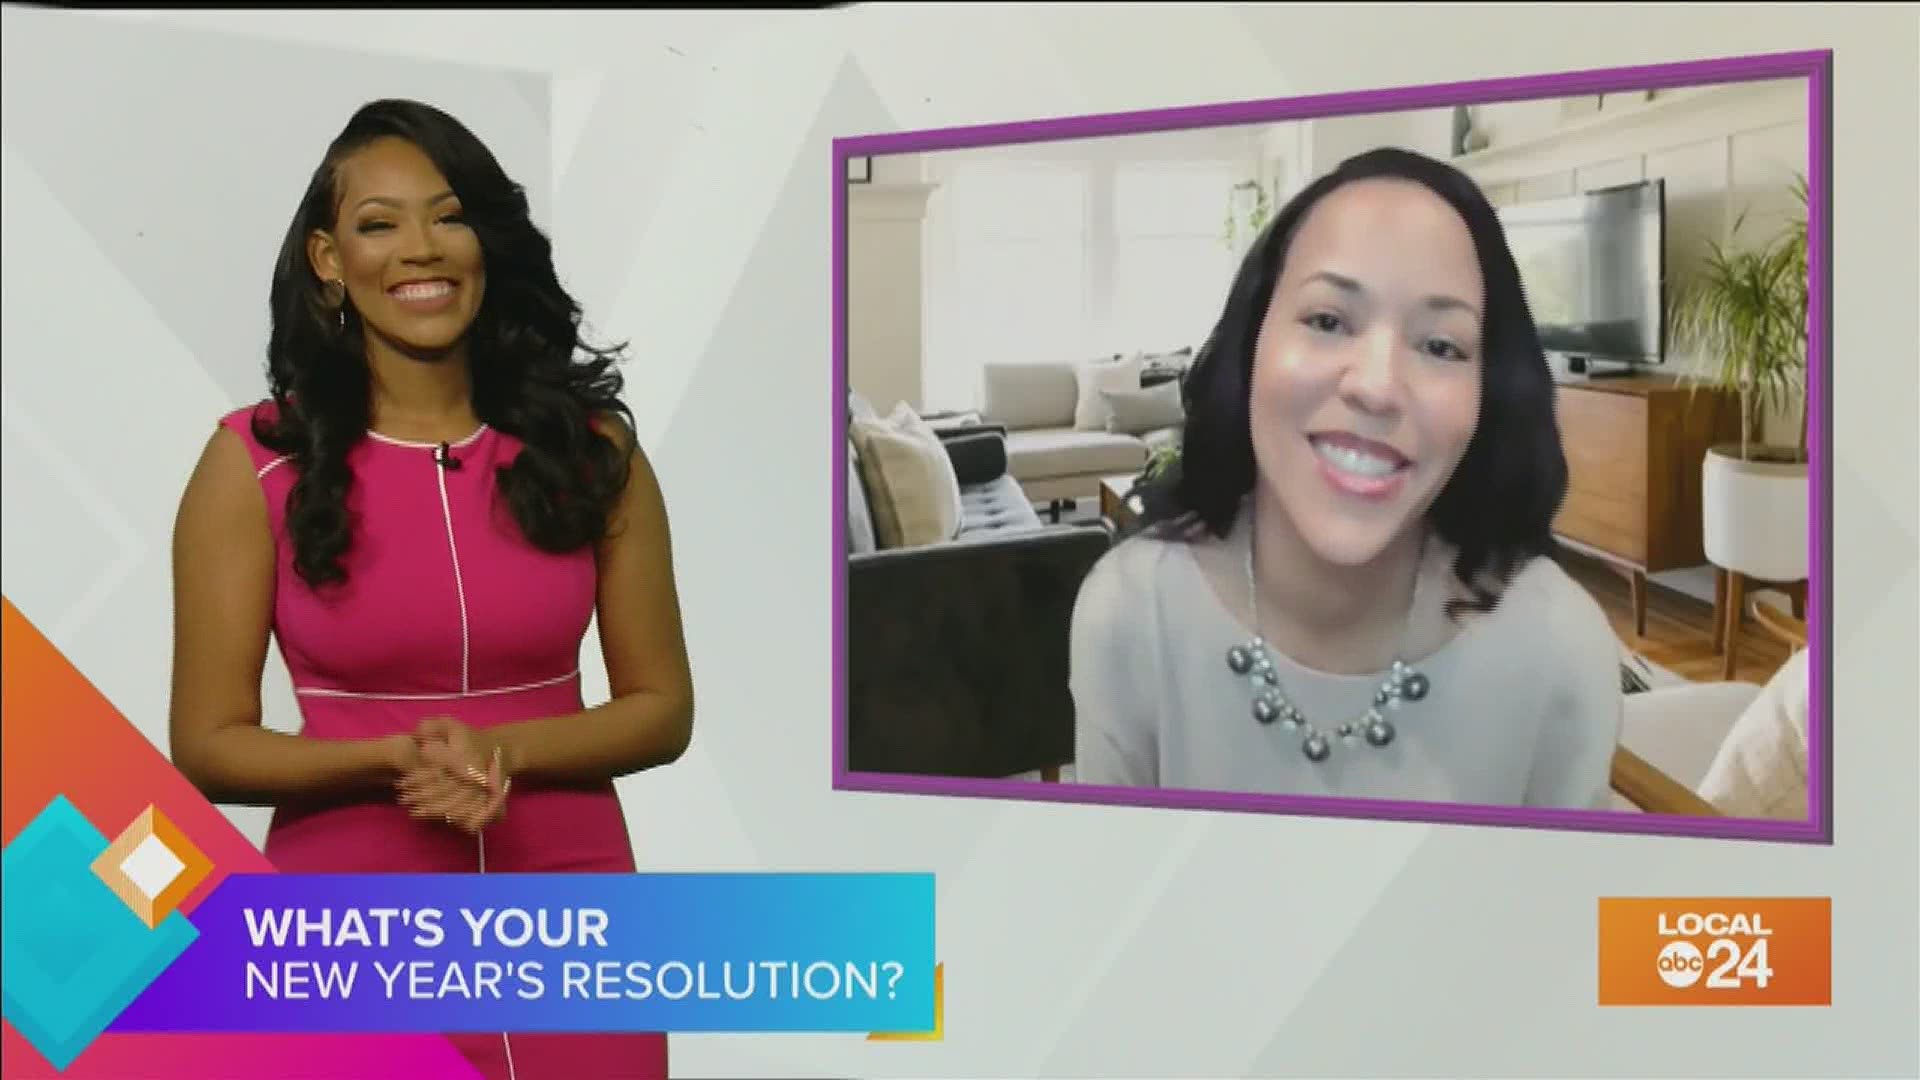 Spend more than just New Year’s Day figuring out your resolutions. Start with realistic resolutions. Develop a plan with Life Coach Danese Banks.